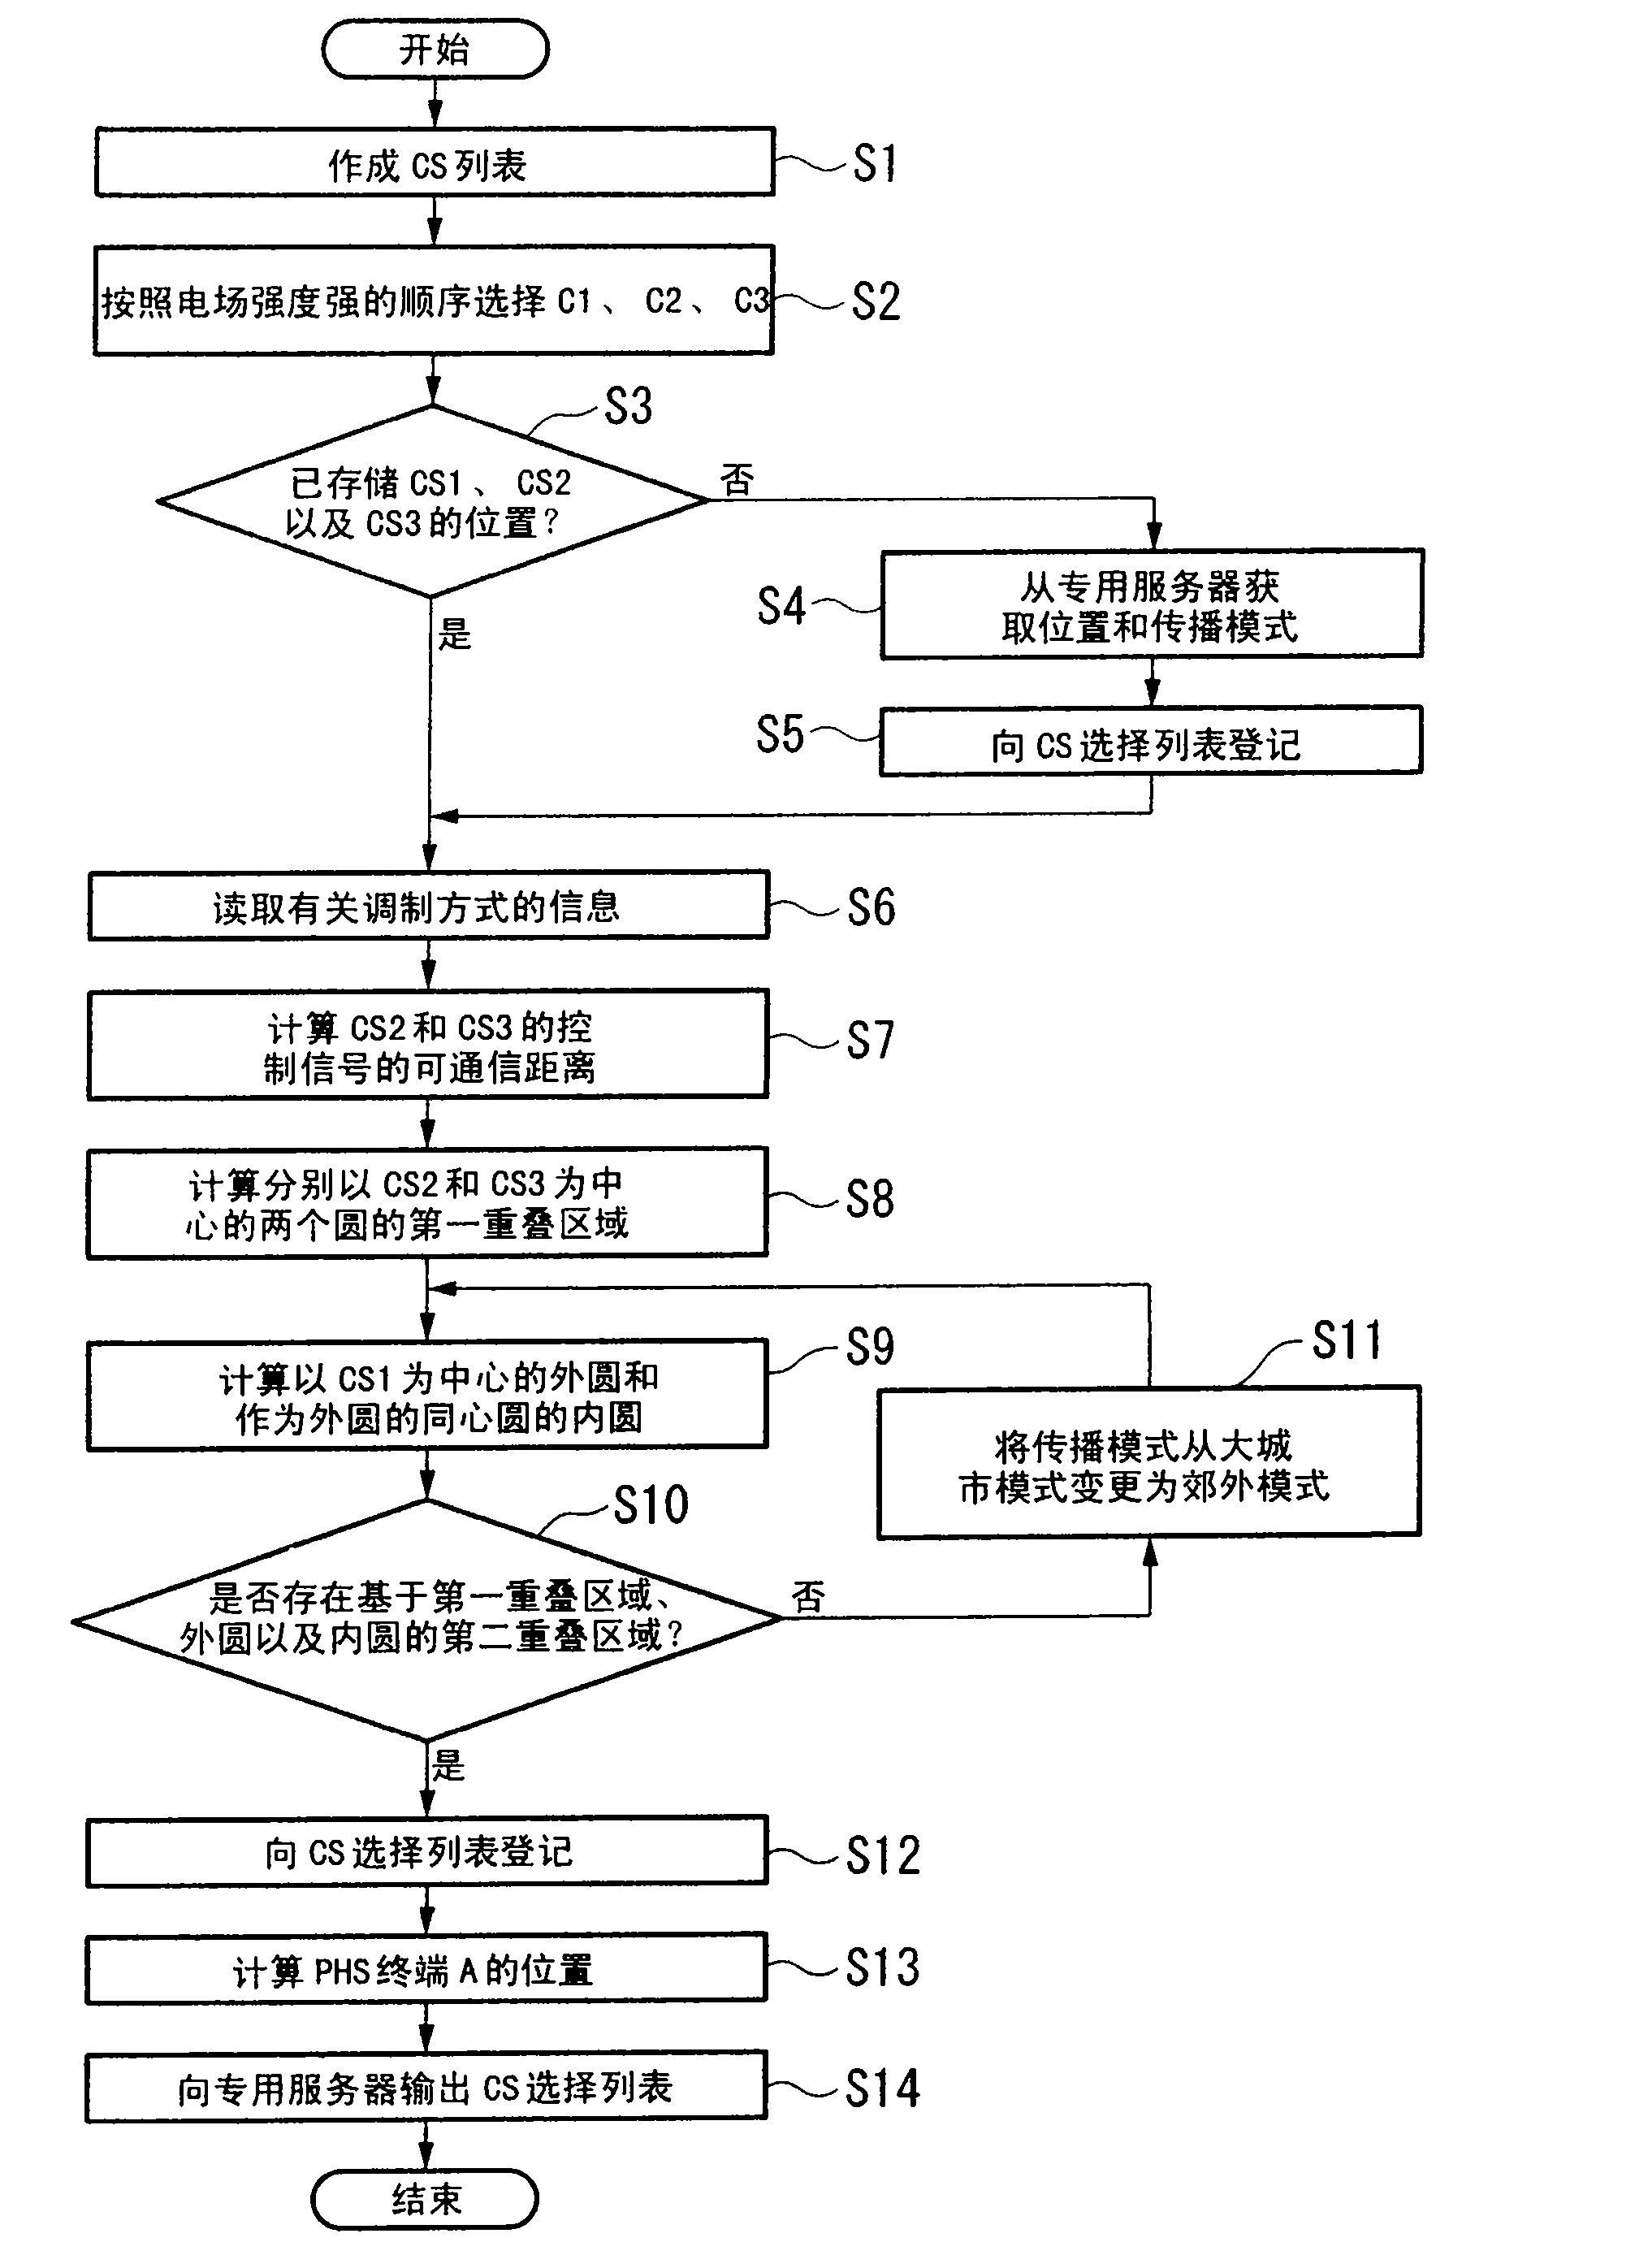 Mobile terminal, base station, and mobile terminal positioning method